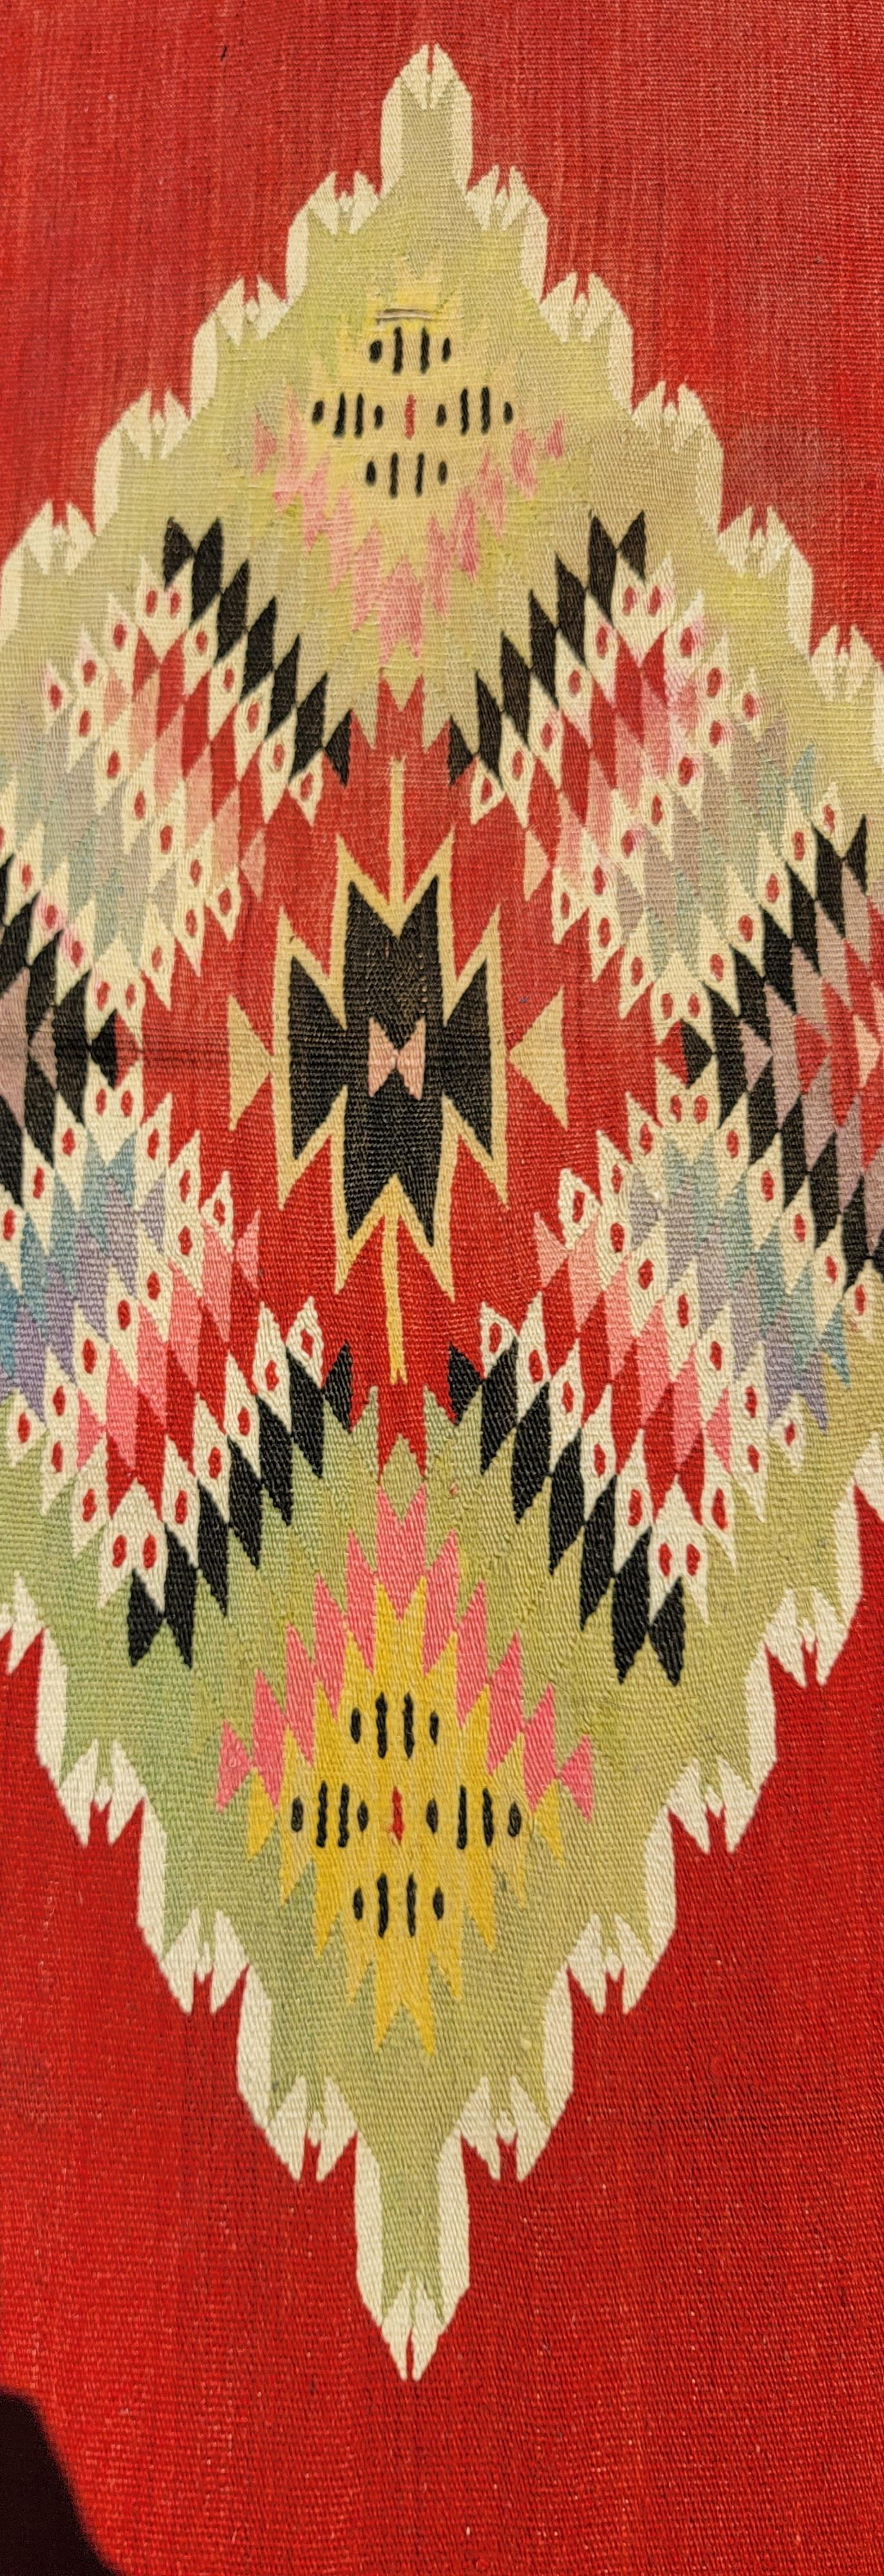 Wool Mid Century Mexican Indian Weaving Blanket For Sale